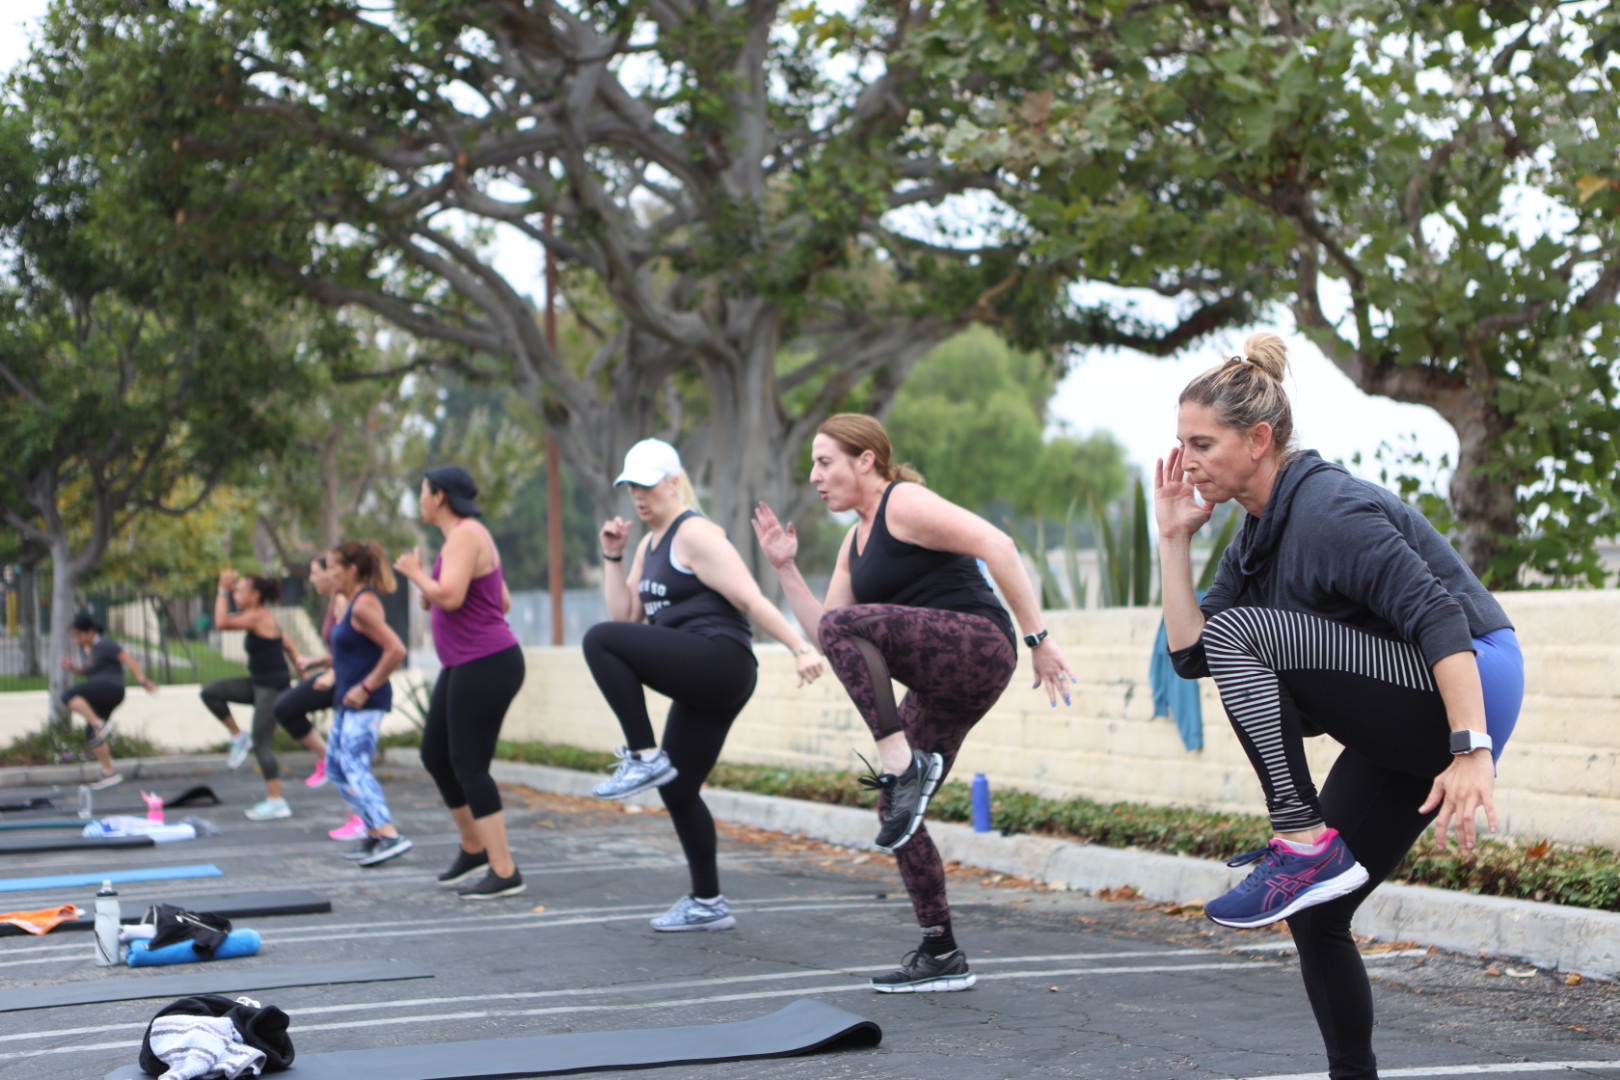 Kickboxing Club Fitness Launches LIVE Virtual & Outdoor Functional ...